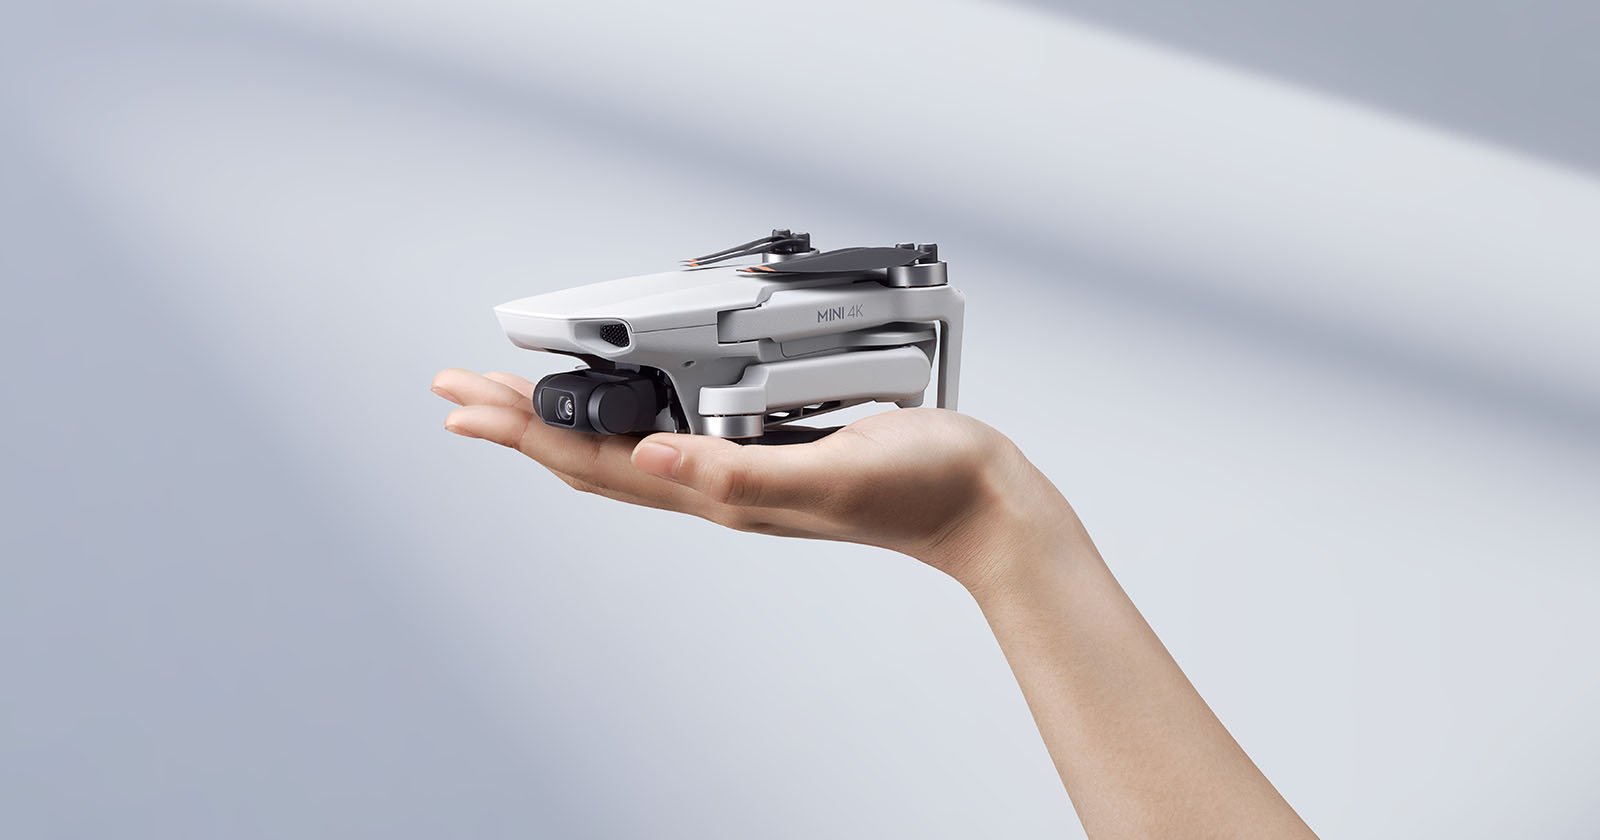 A person's hand holding a compact white drone with a camera, set against a soft gray background.